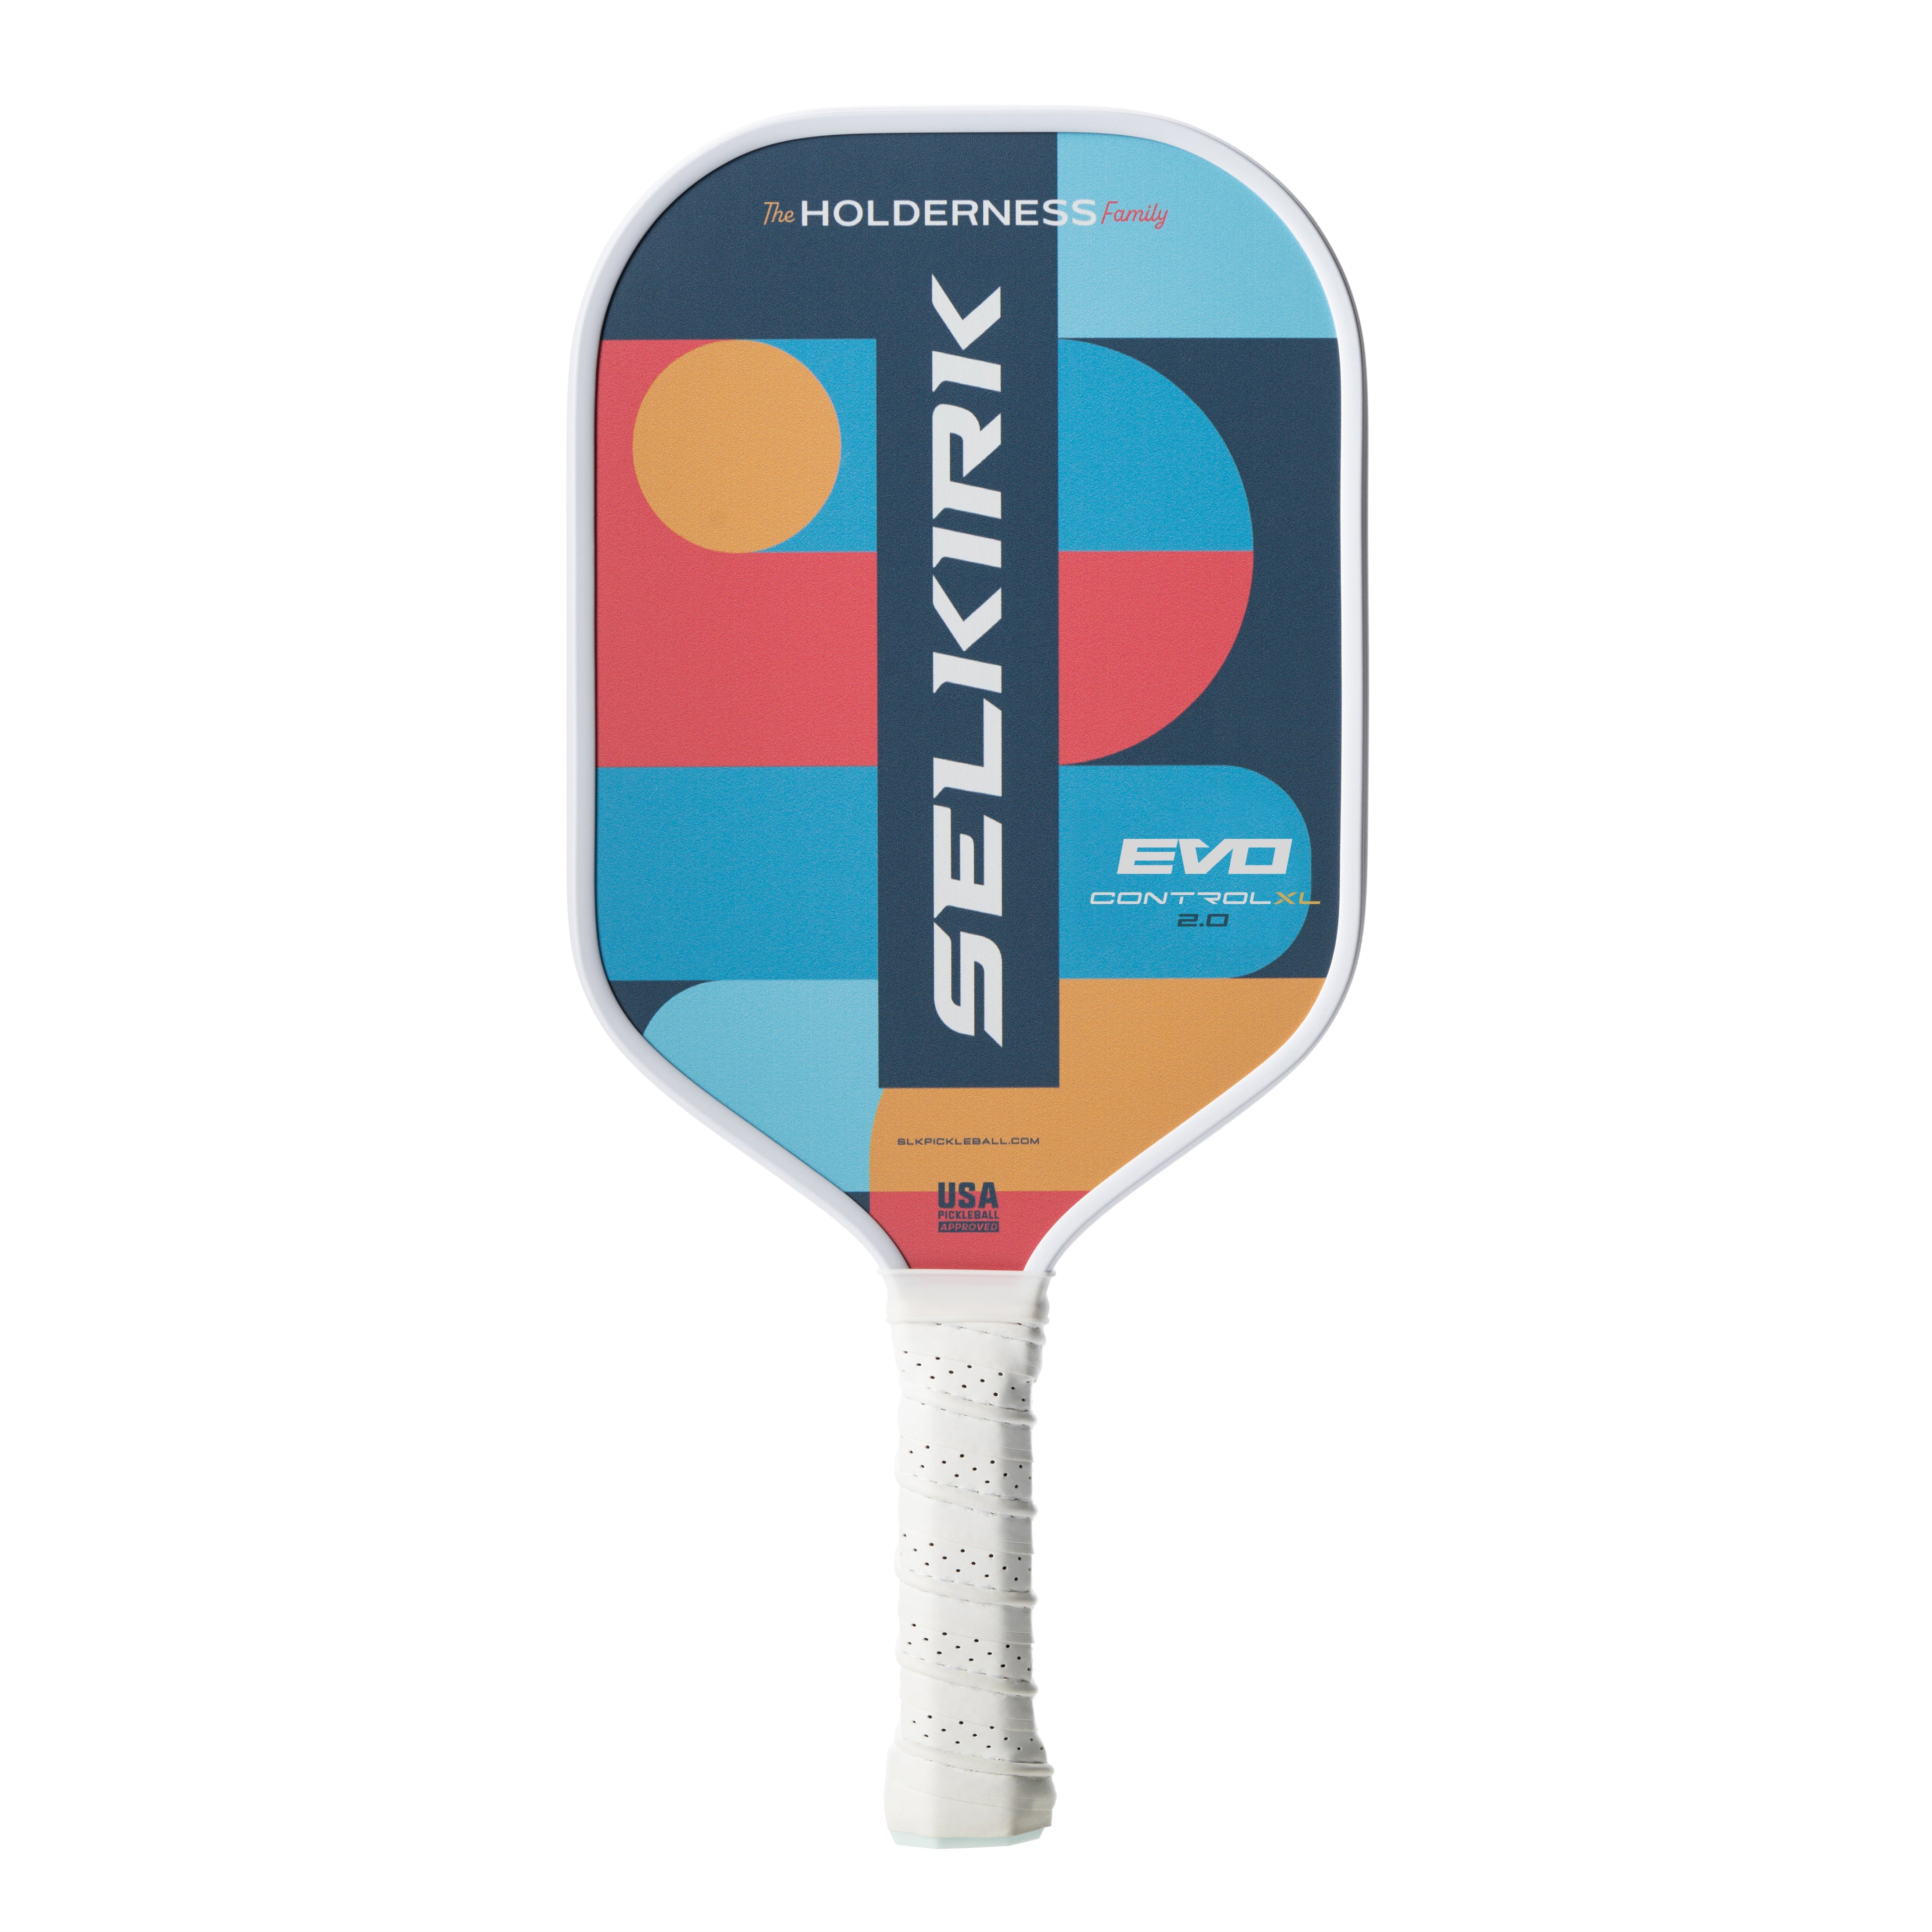 SLK by Selkirk x The Holderness Family Evo 2.0 - Control - XL - Pickleball Paddle